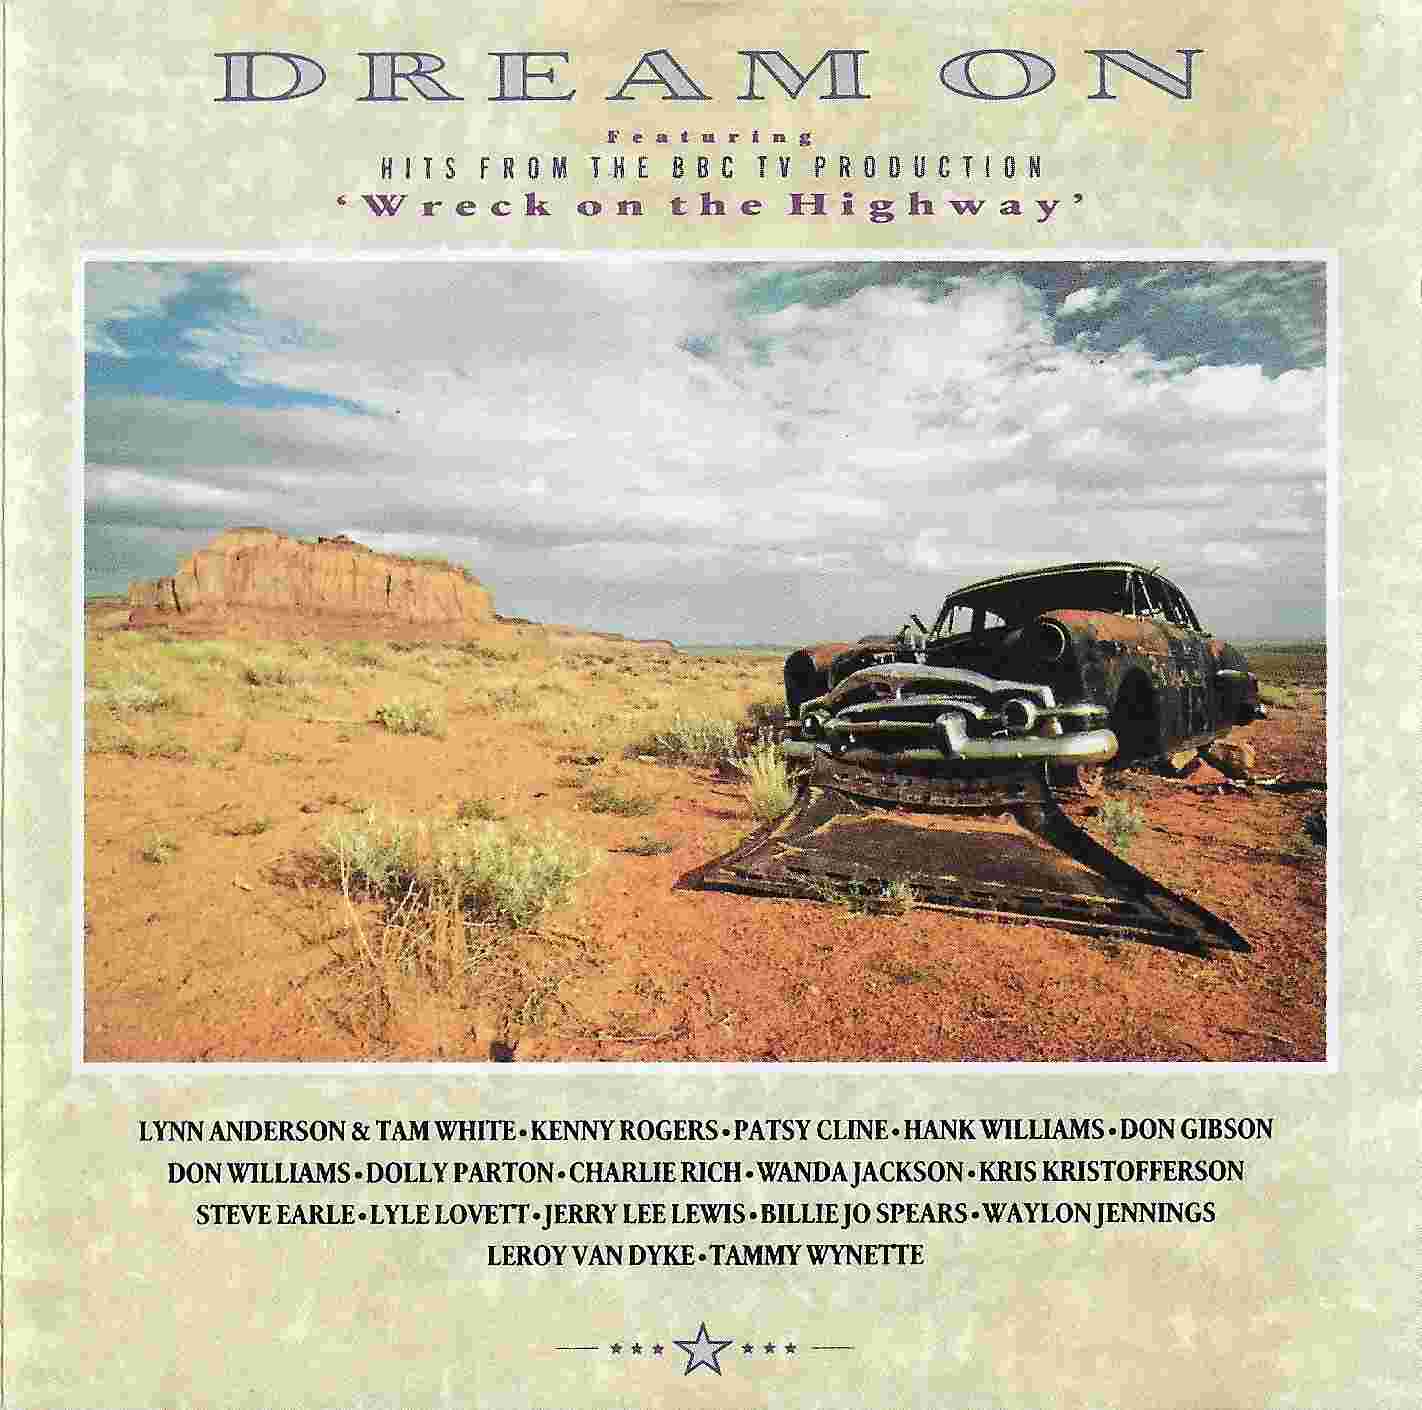 Picture of BBCCD769 Dream on by artist Various from the BBC cds - Records and Tapes library